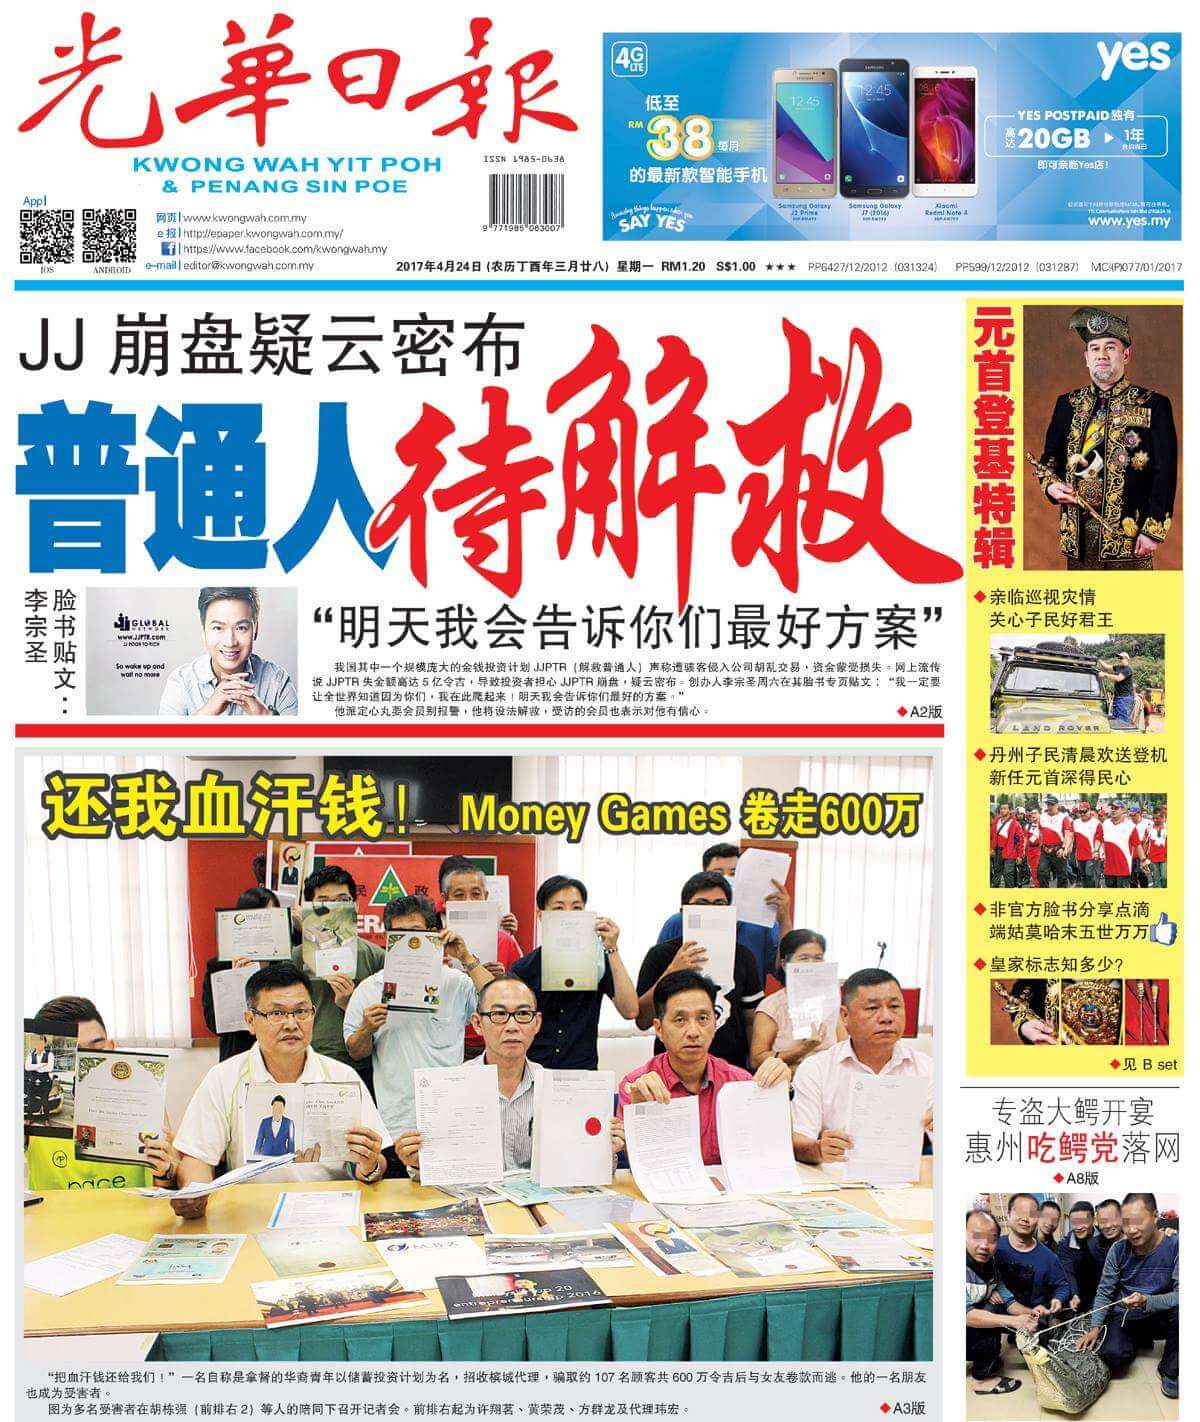 Malaysia Newspapers 13 Kwong Wah Yit Poh